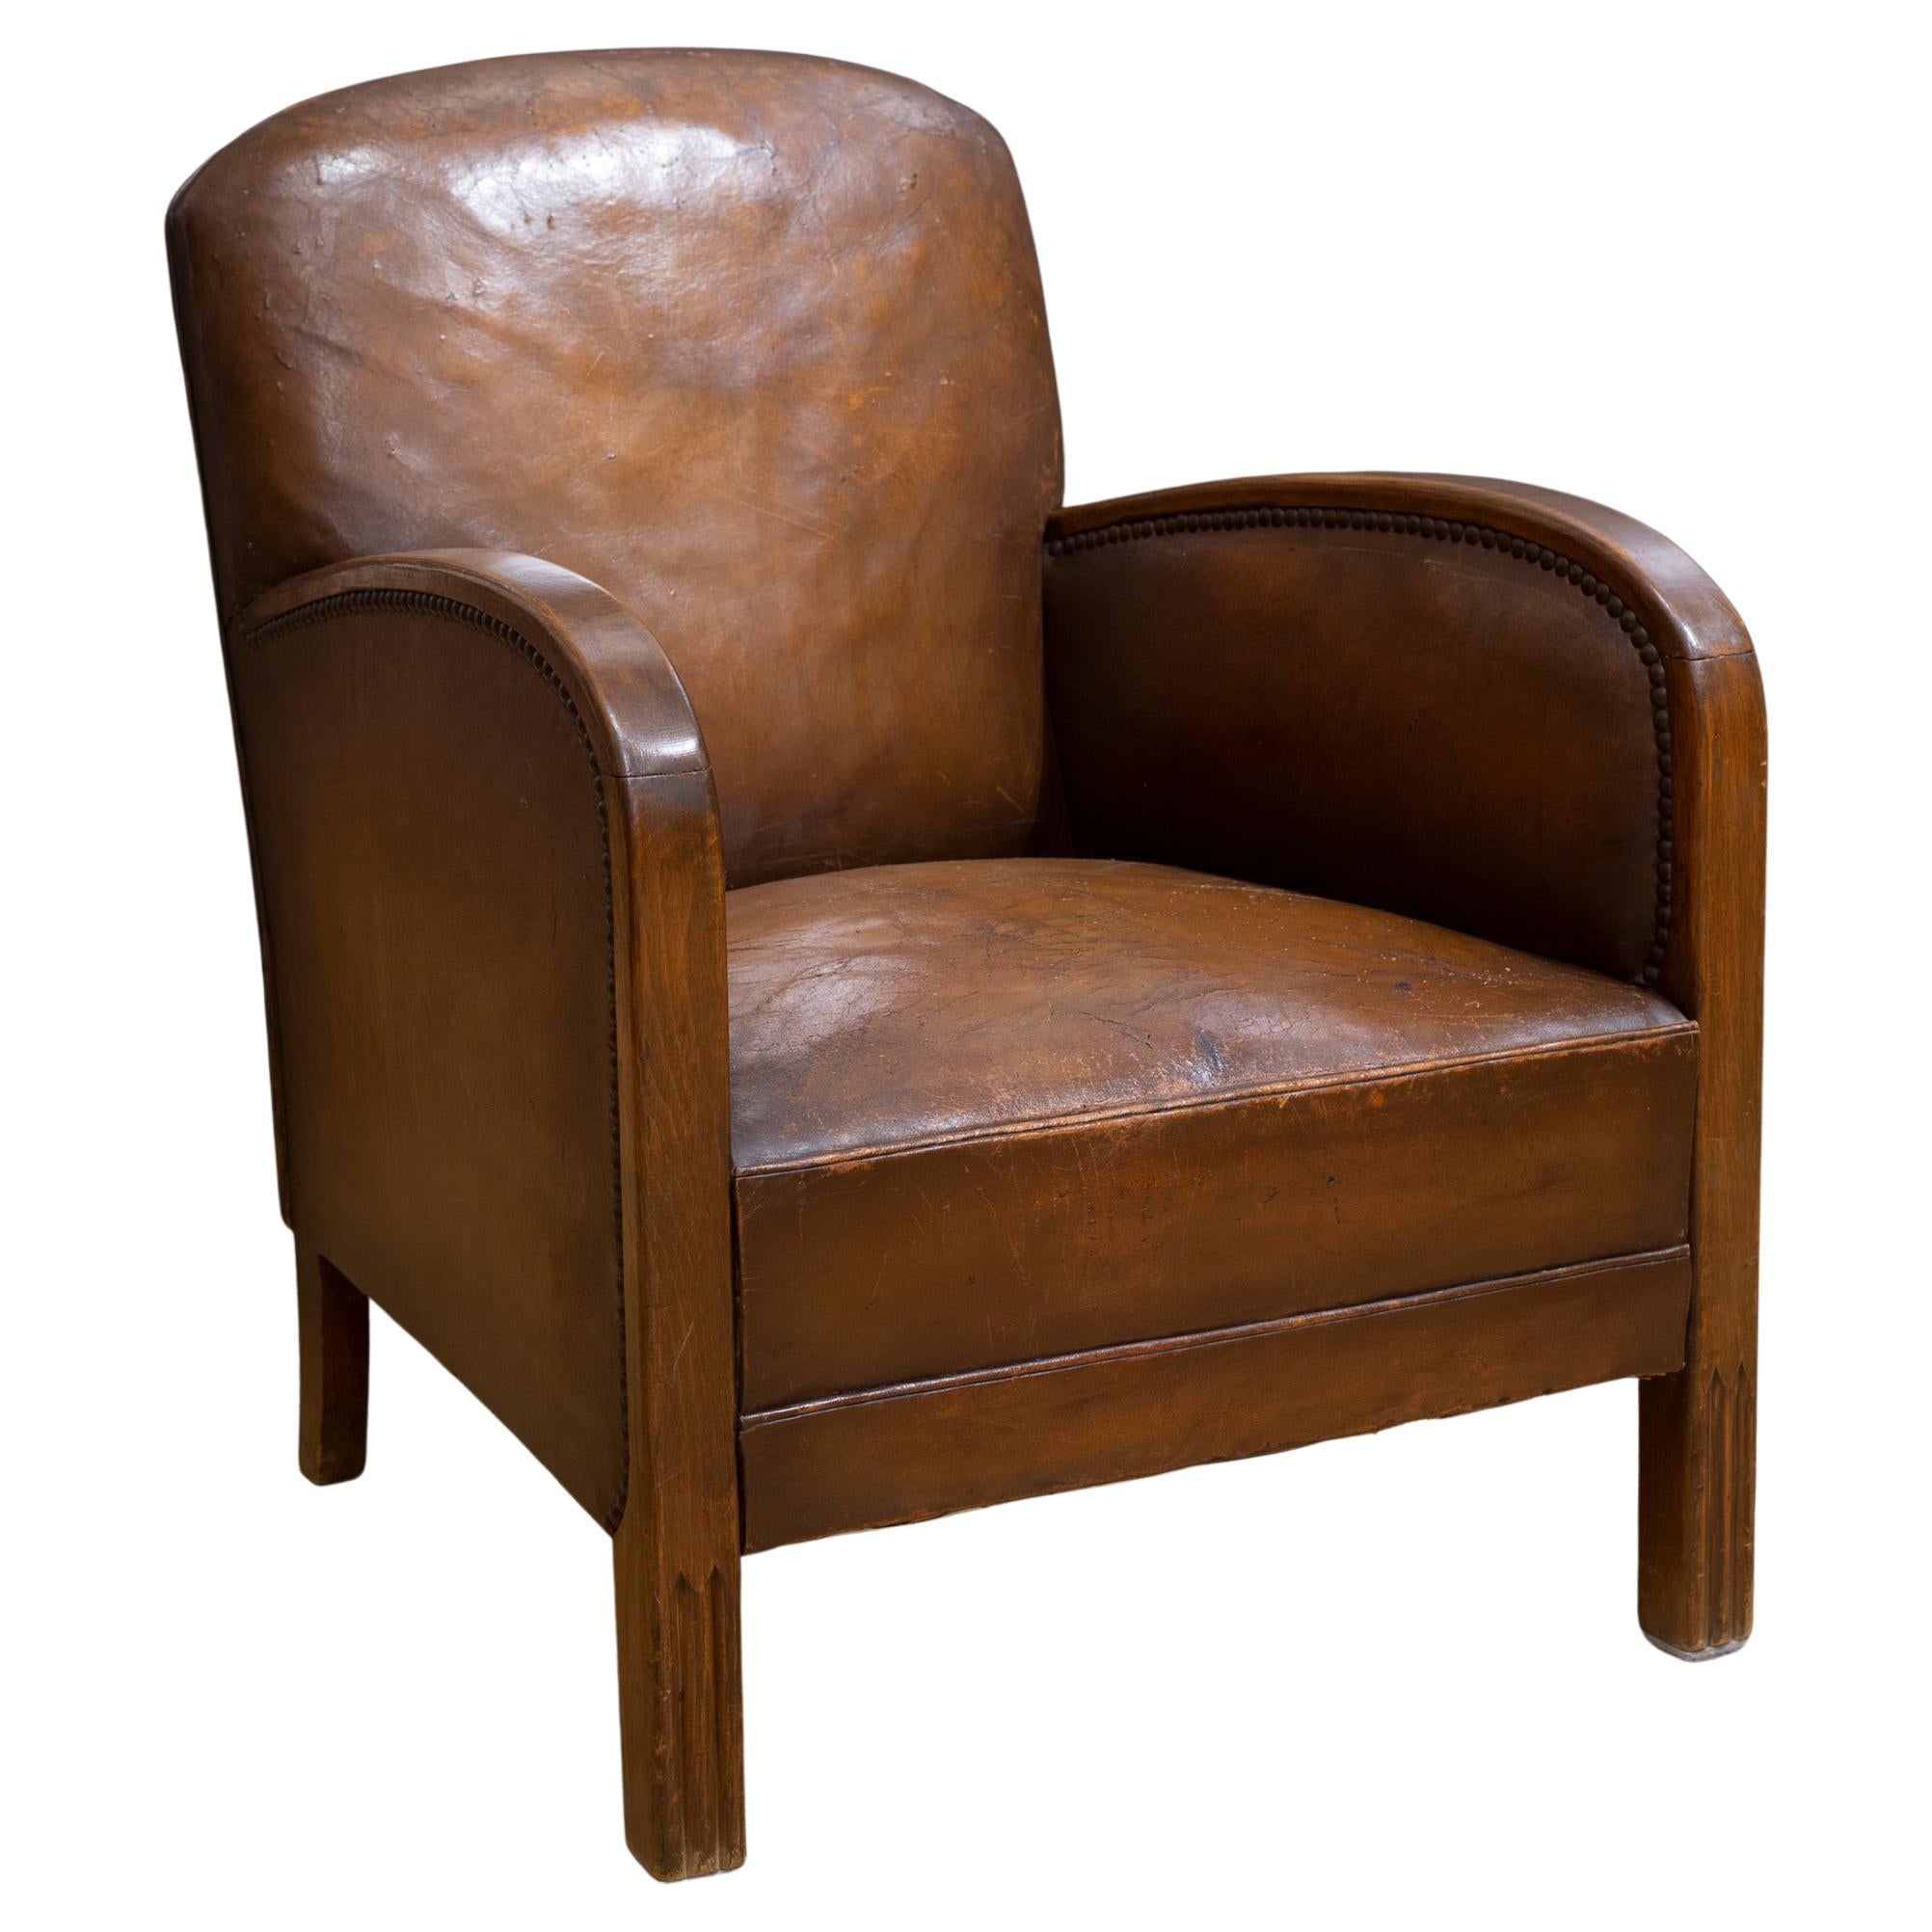 Early 20th c. French Library Club Chair c.1930-1940